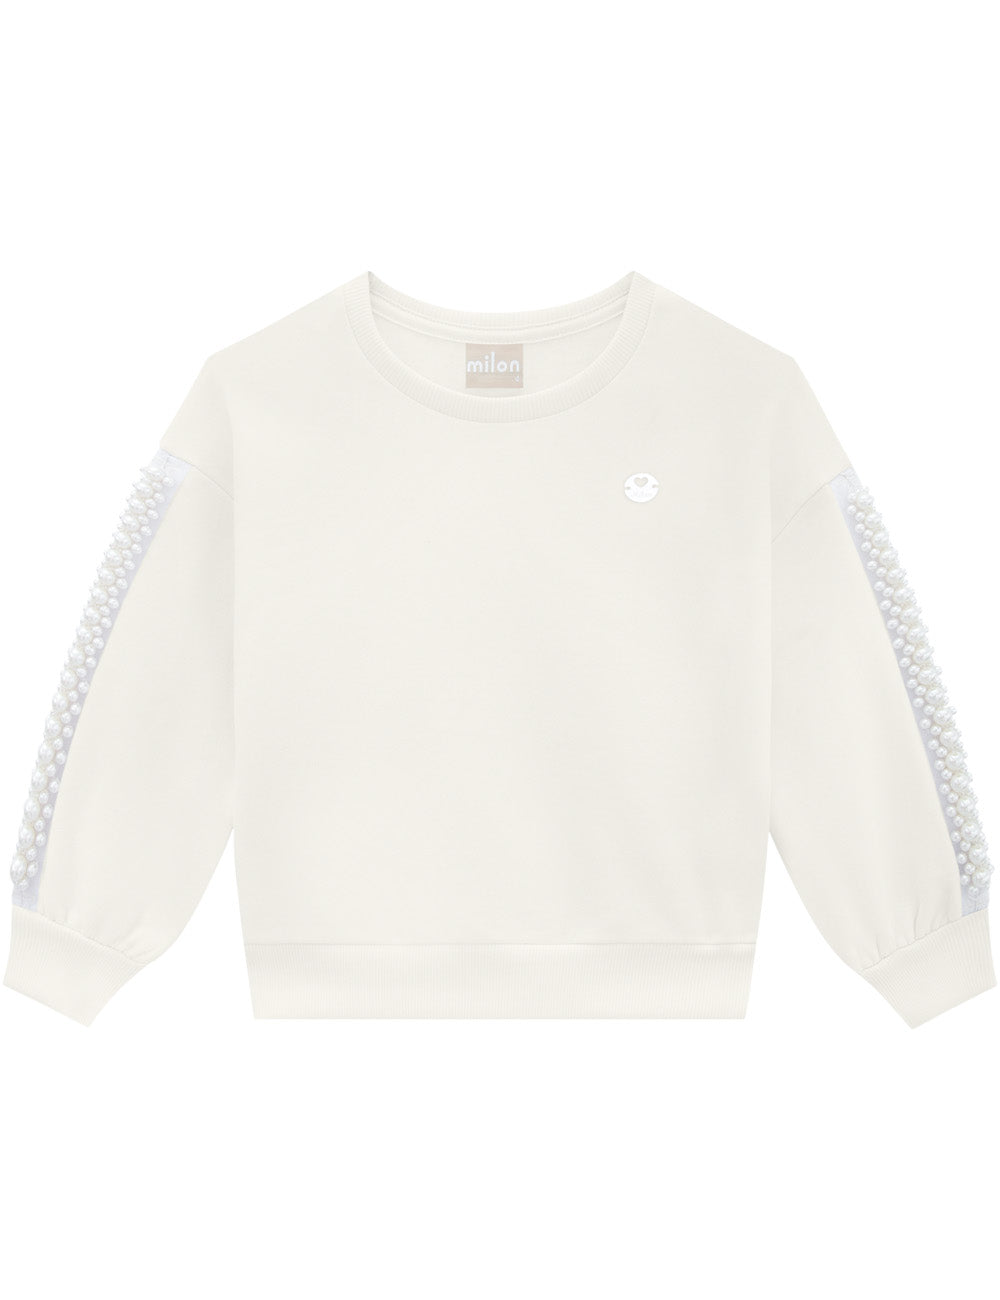 White Sweatshirt with Pearl Accented Sleeves by Milon